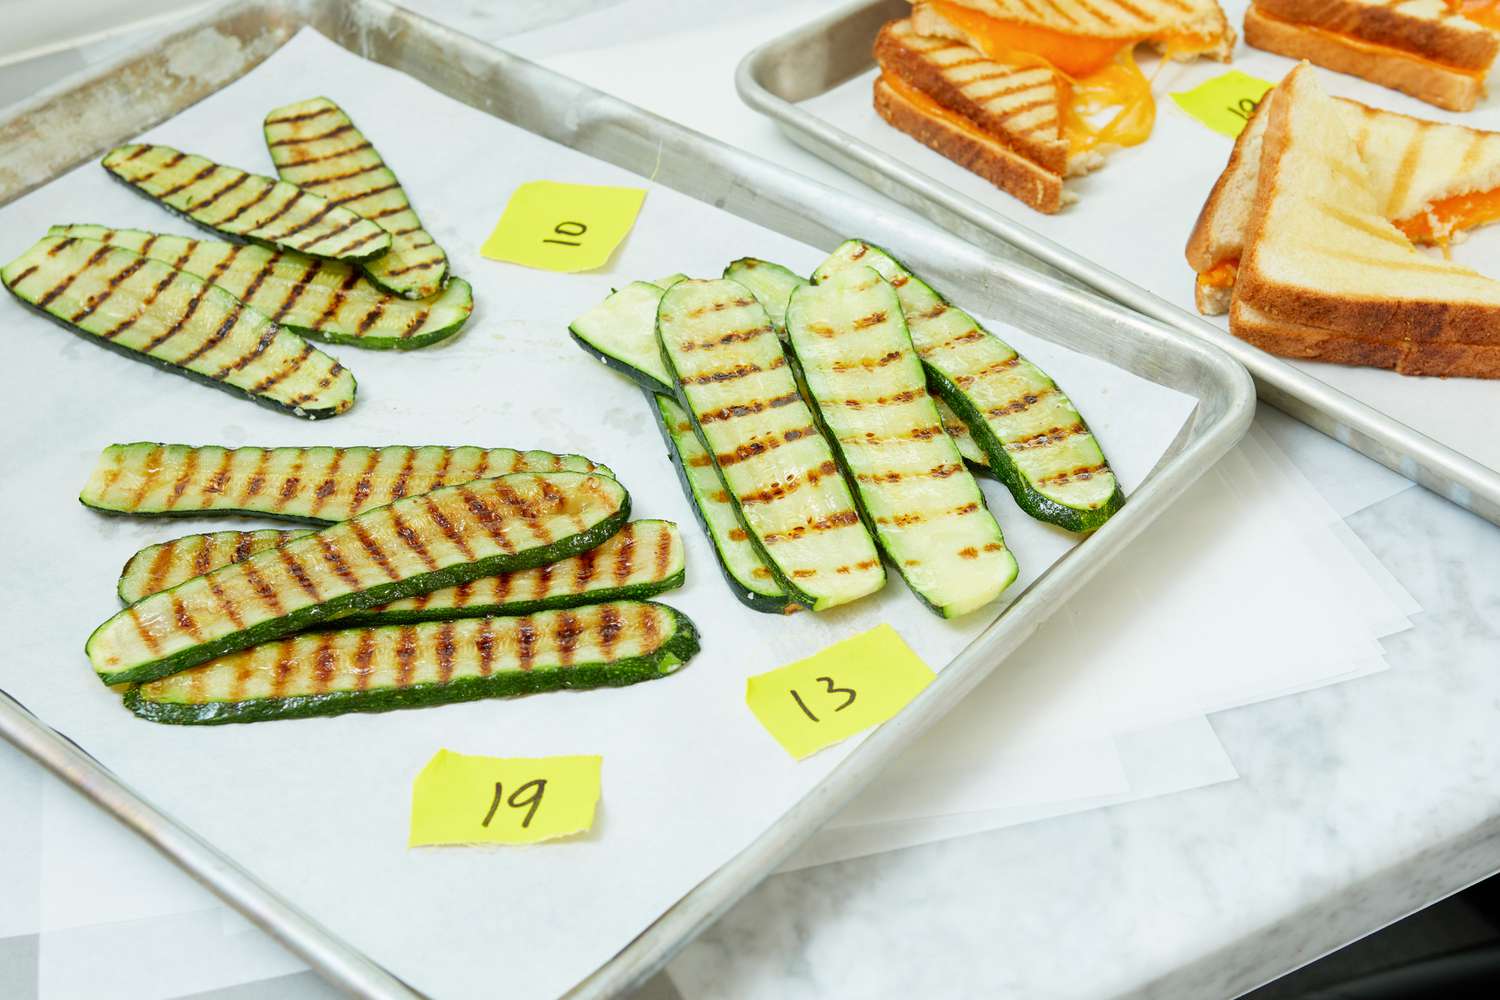 A plate of grilled zucchinis that were cooked on three different grill pans. 